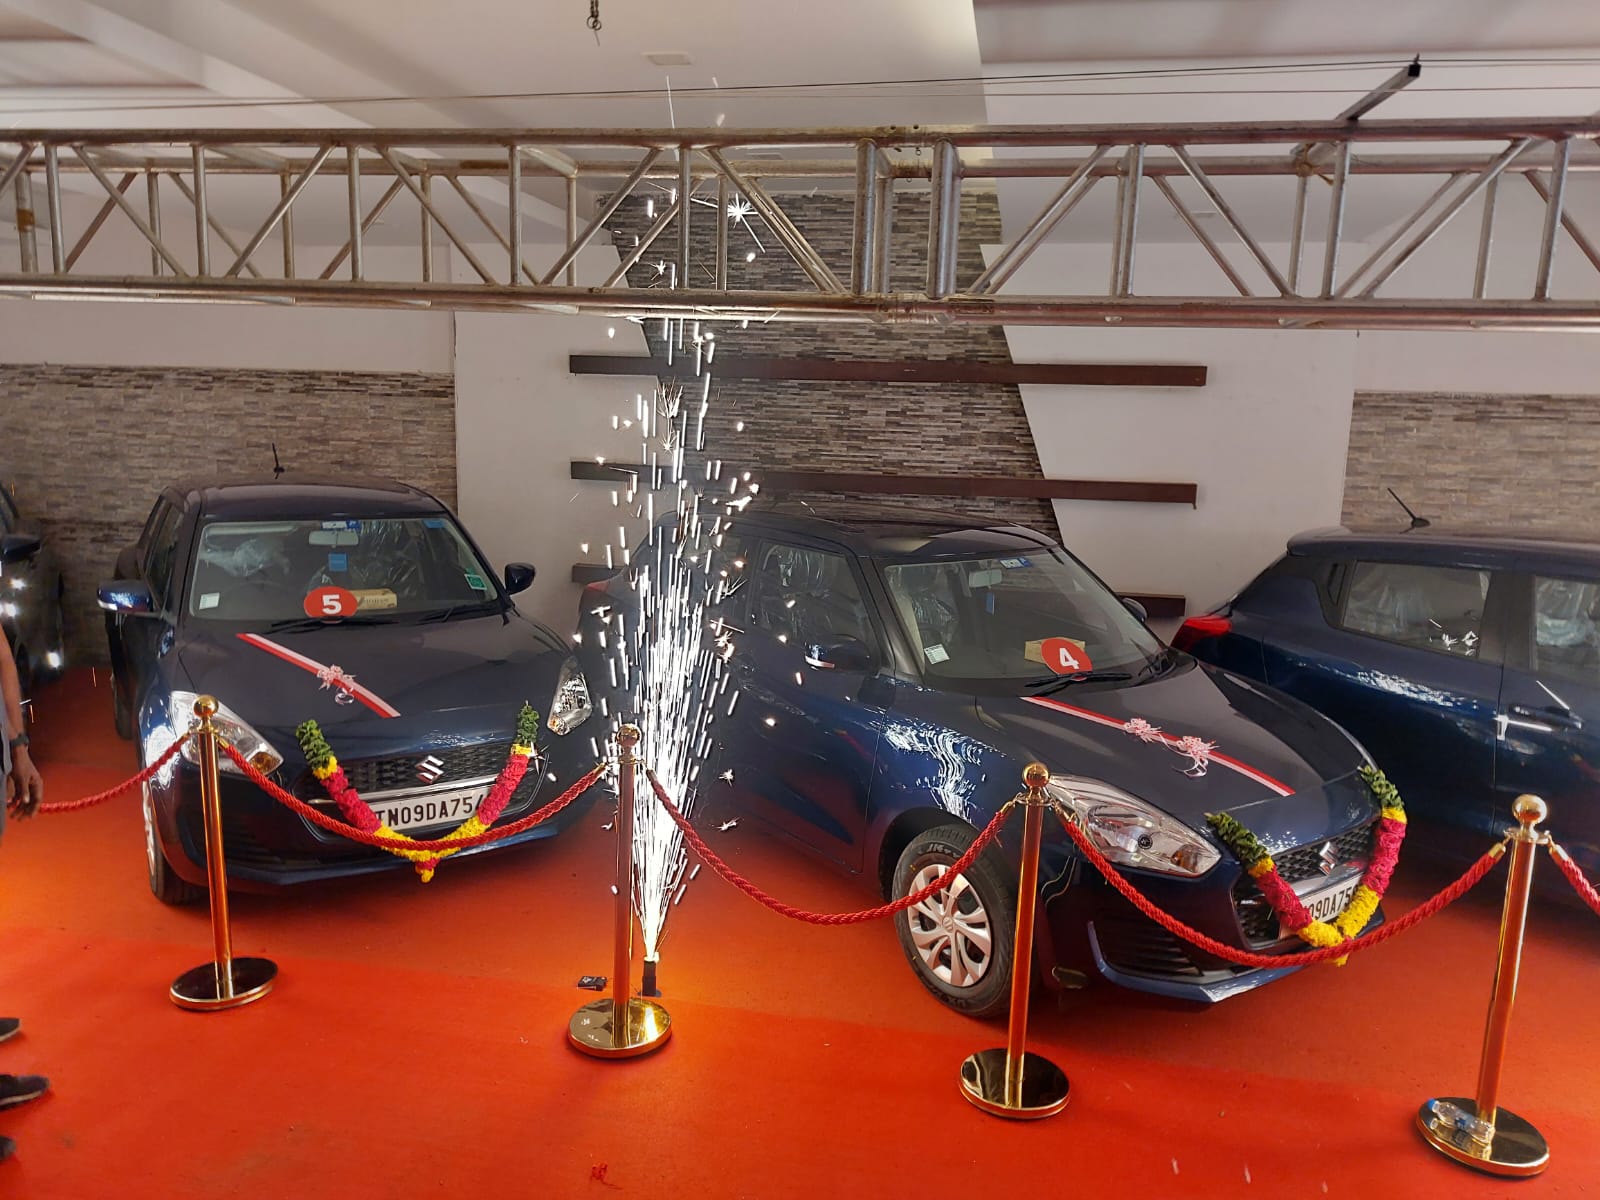 Chennai Jewellery shop owner gifts cars, bikes to staff for Diwali